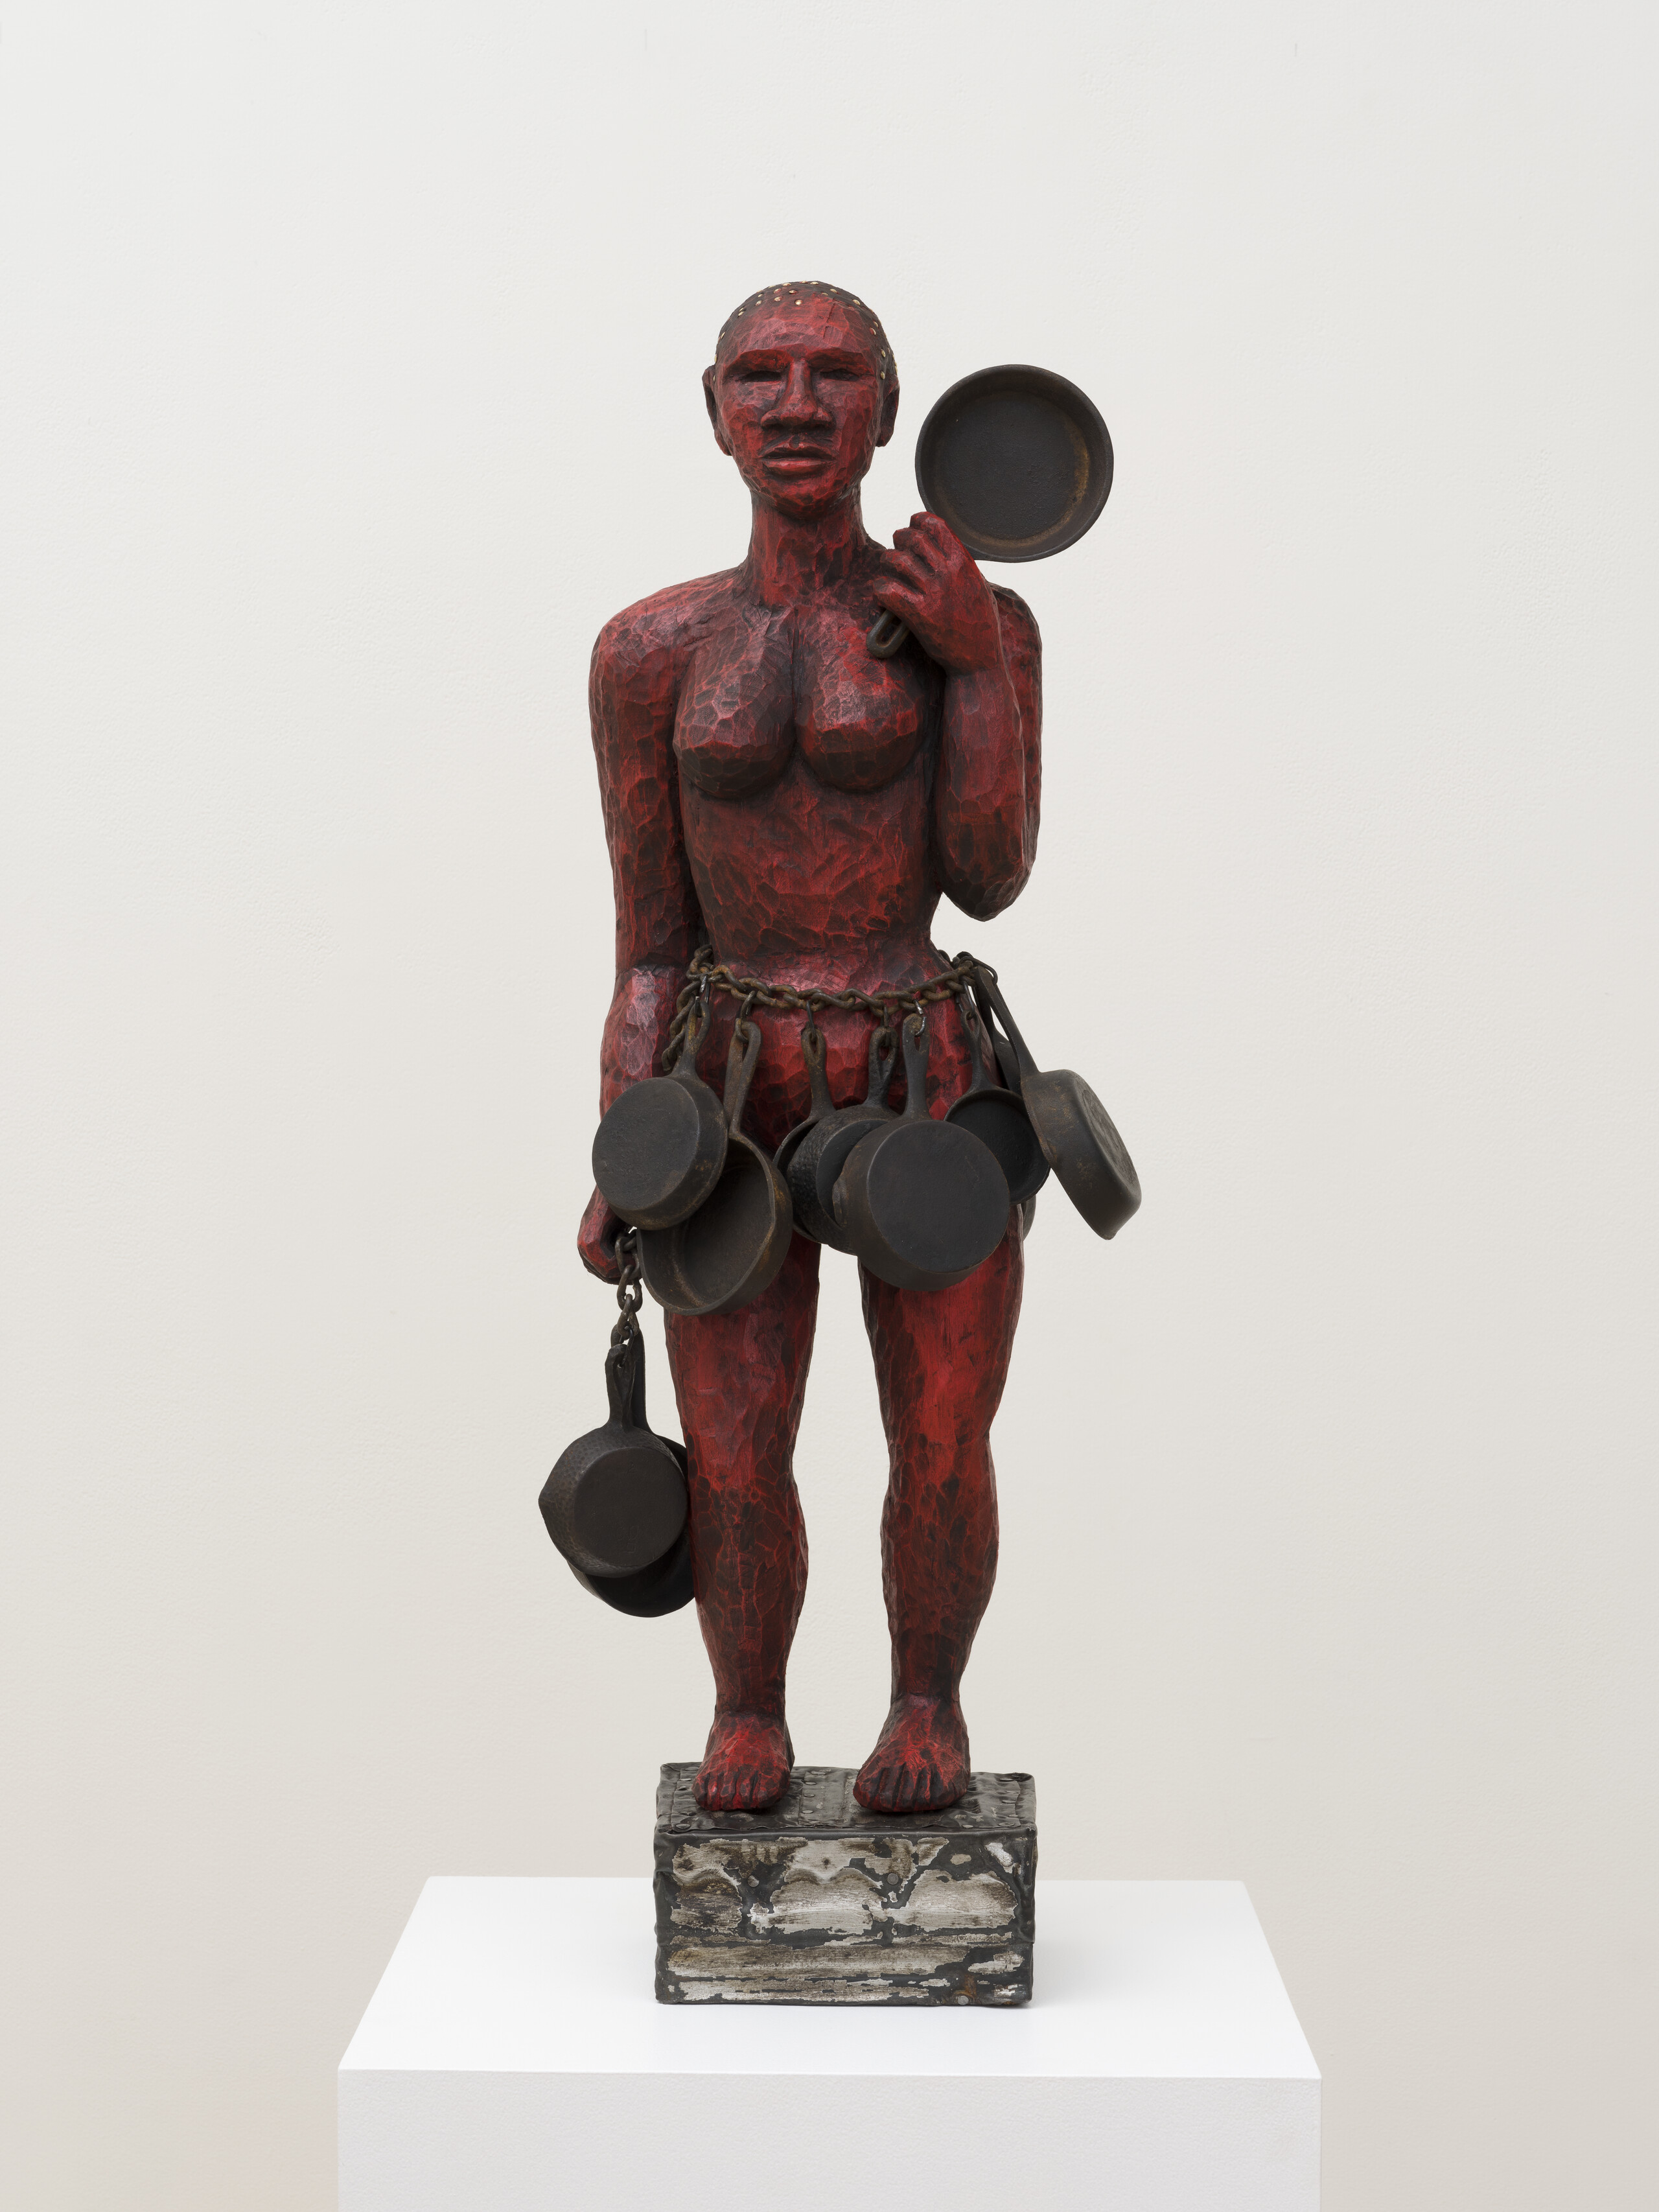 A red painted wooden sculpture of a woman holding a cast iron skillet in her left hand. She has a heavy chain around her waist with multiple skillets hanging from it like a skirt. She stands on a small wooden platform.